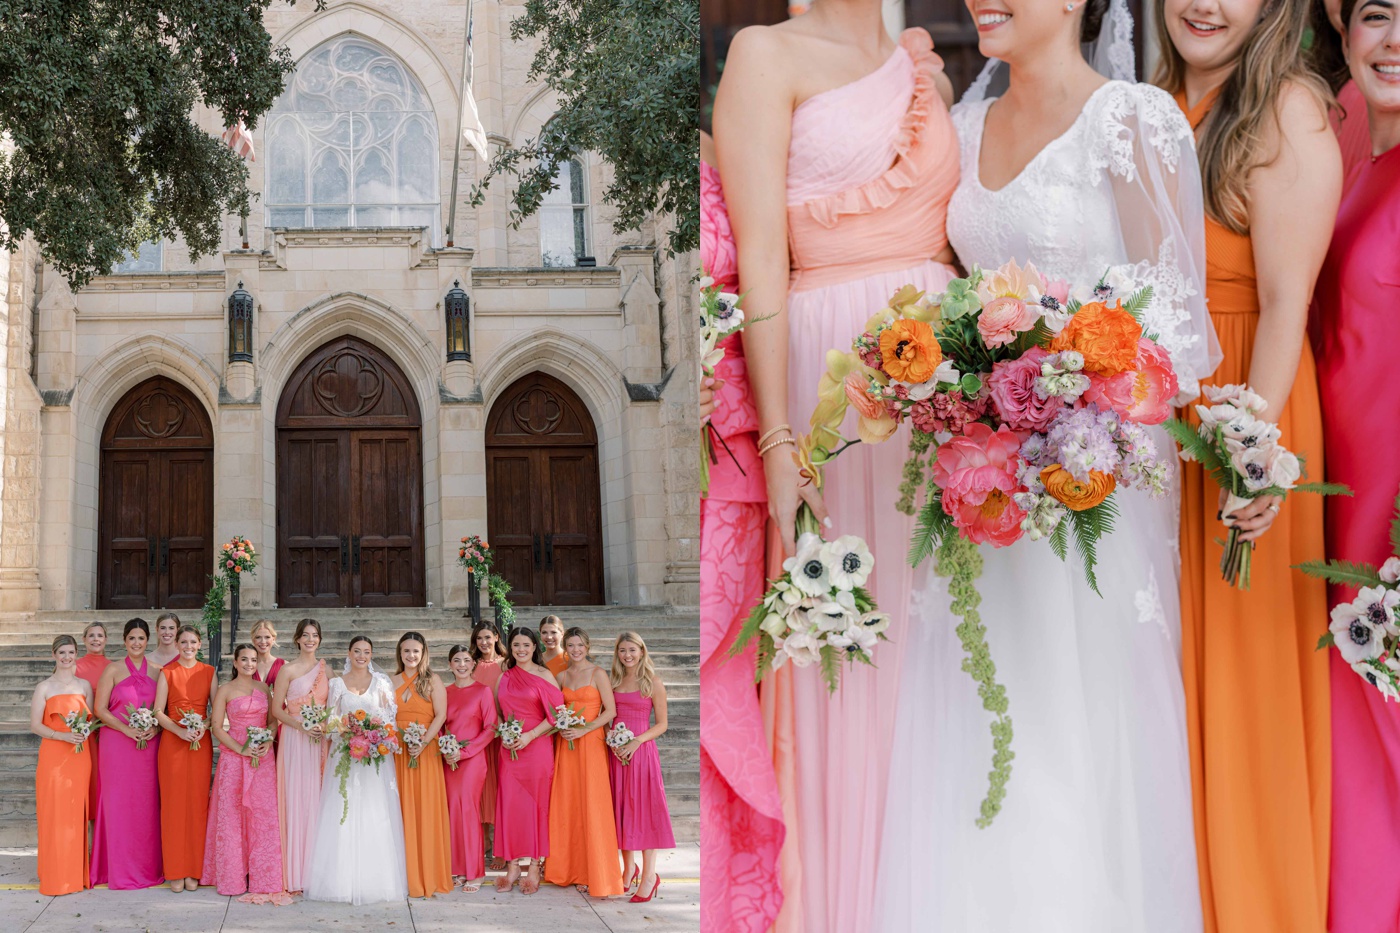 Bride holding a colorful wedding bouquet with coral charm peonies and orange ranunculus